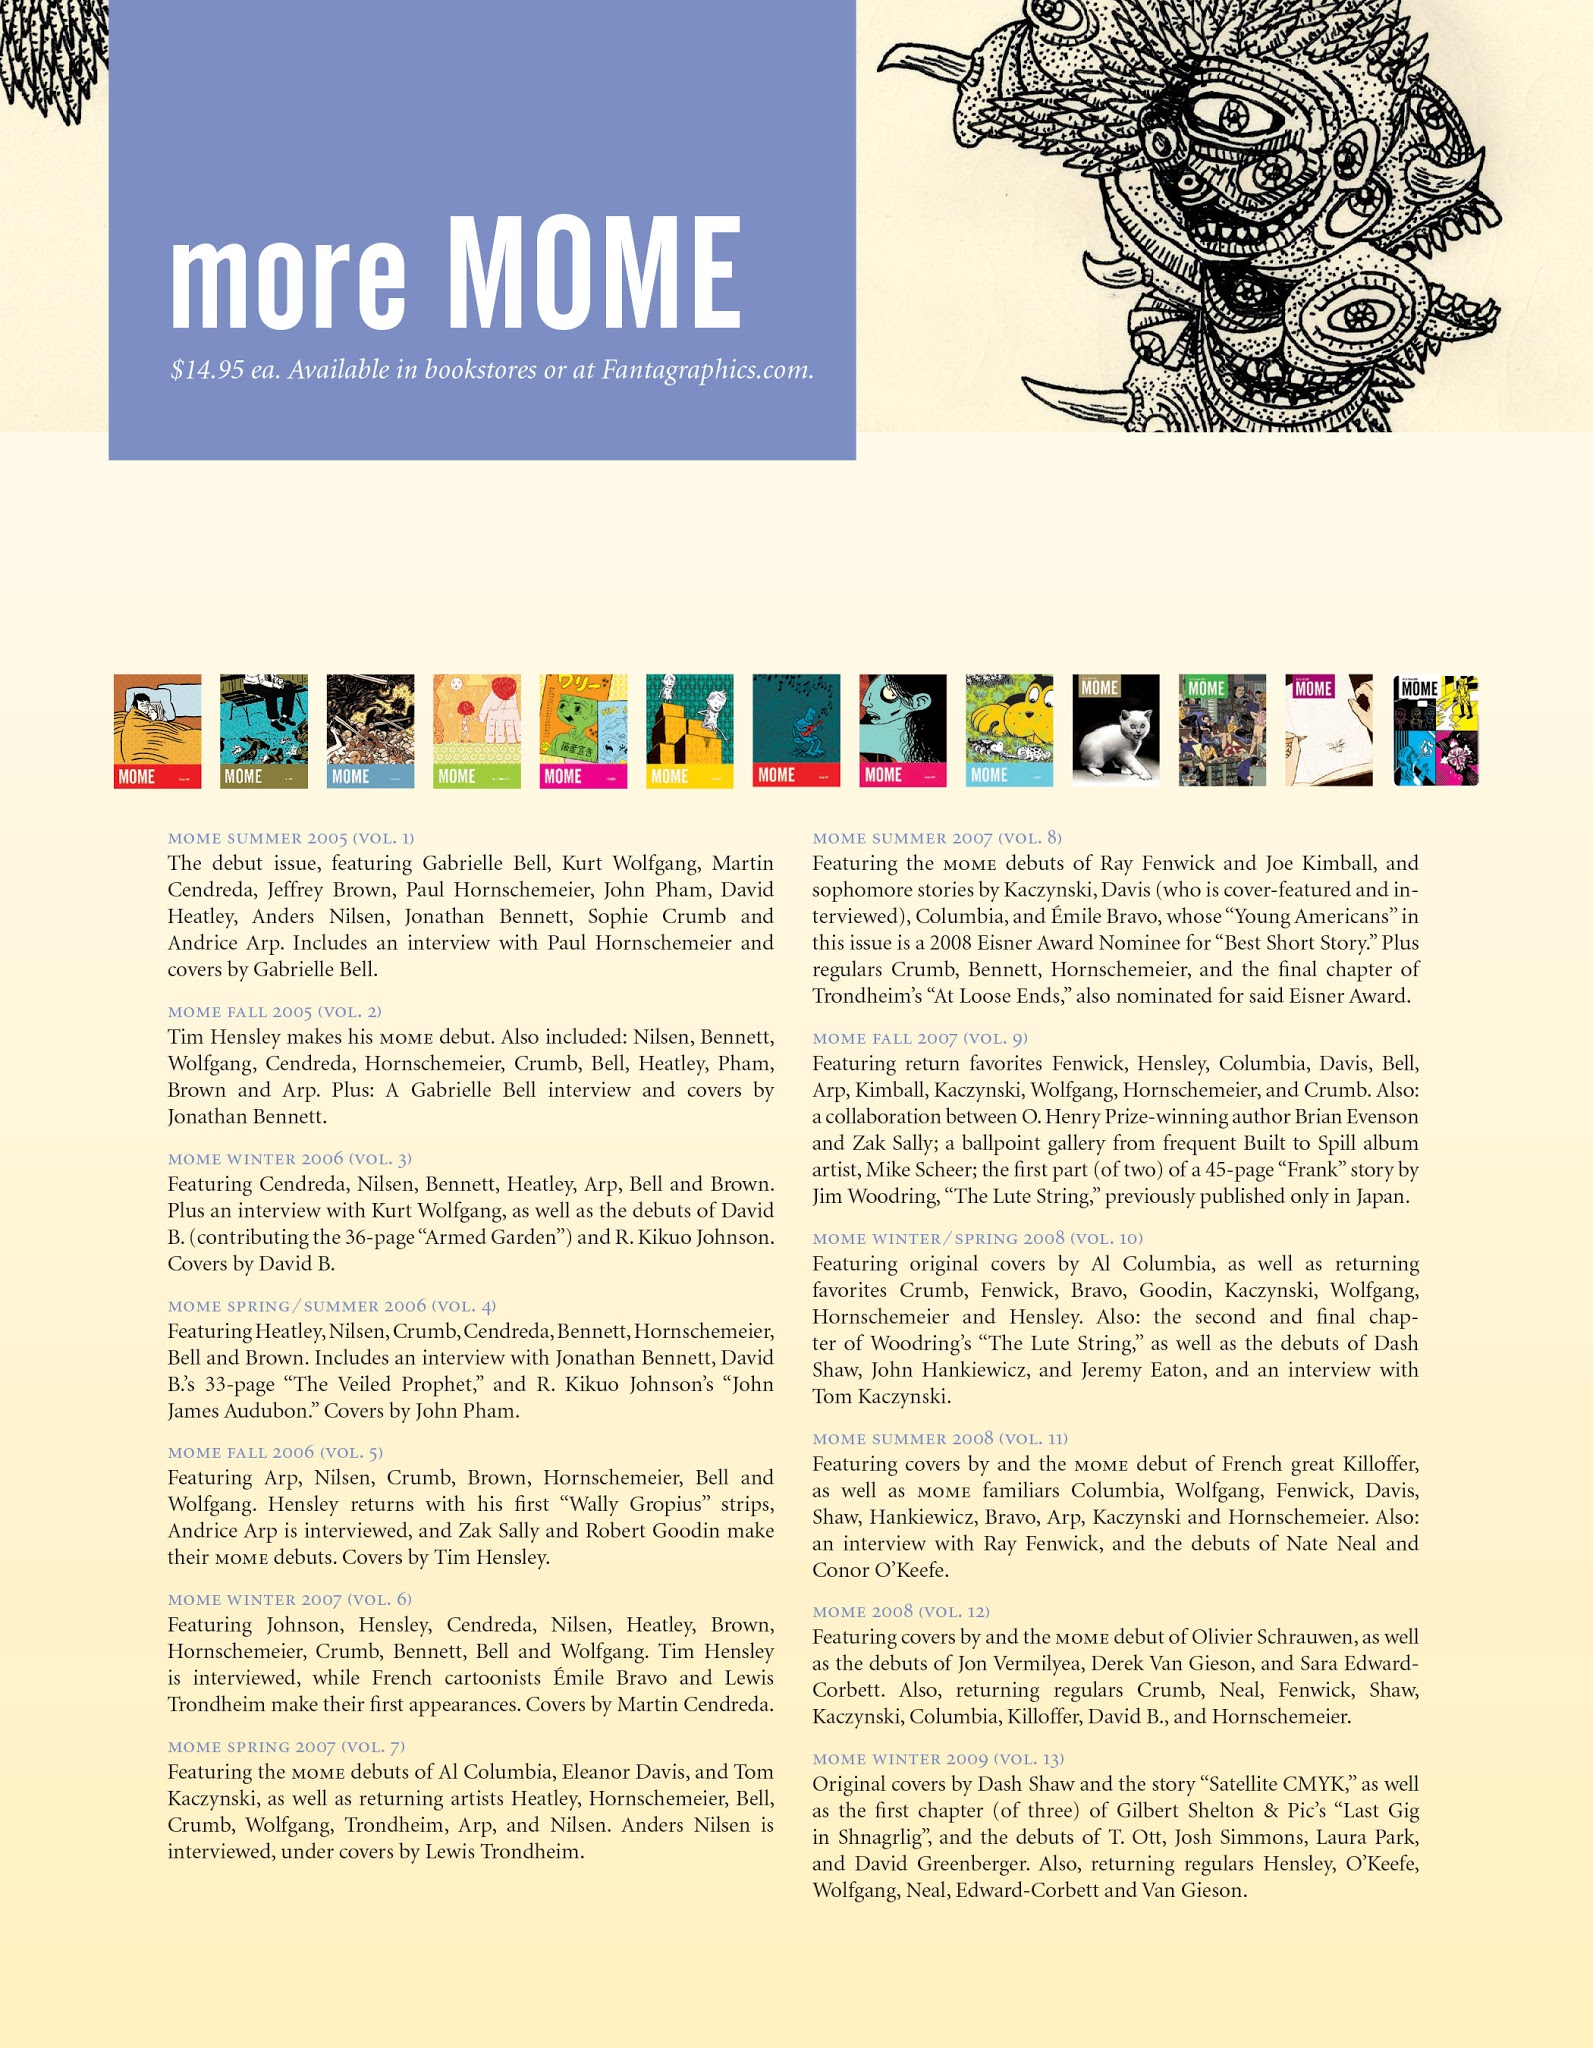 Read online Mome comic -  Issue # TPB 14 - 111